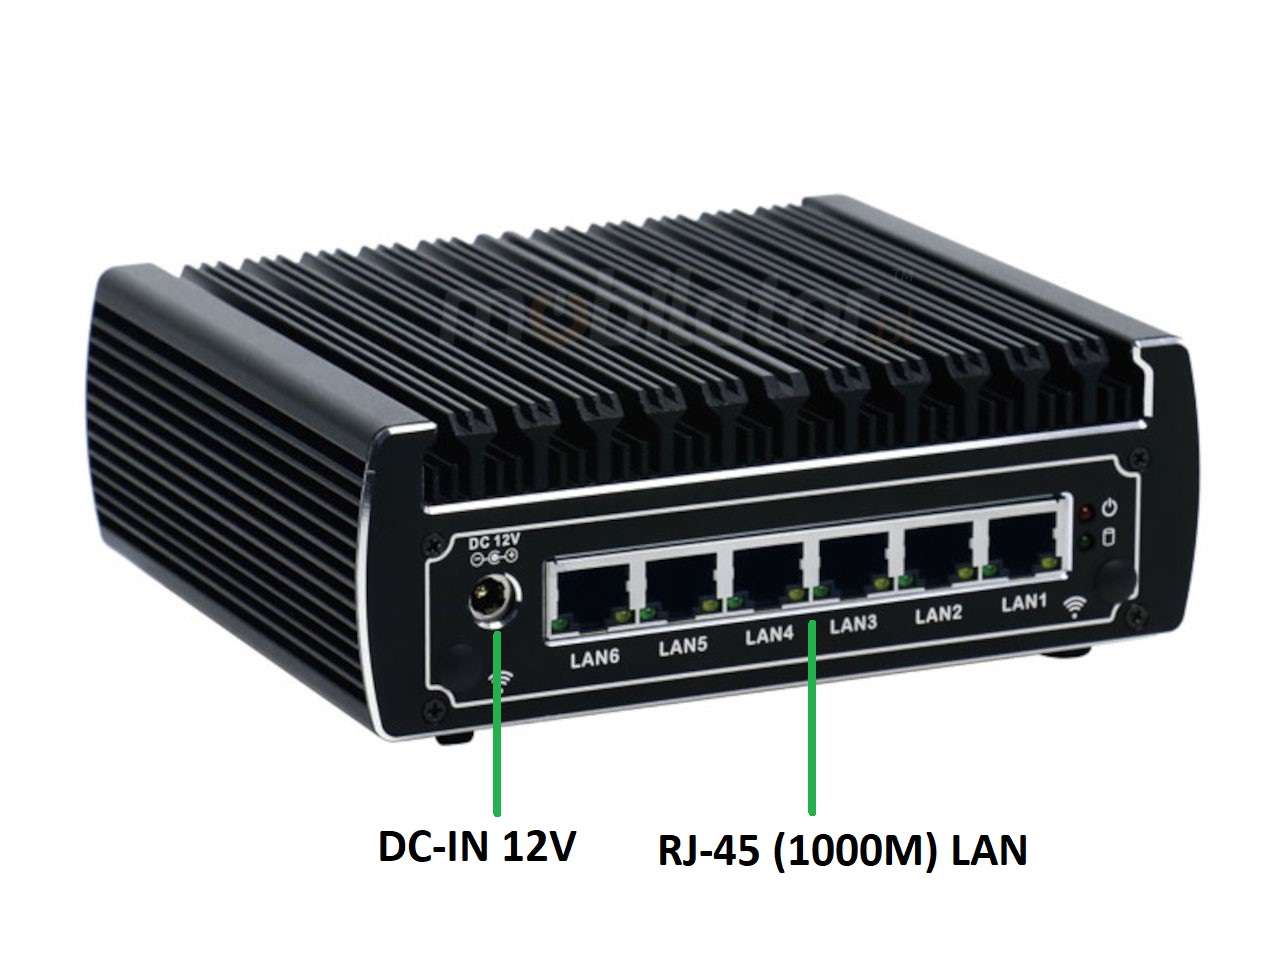  IBOX N133  v.14, back IO, industrial small fast reliable fanless industrial small LAN INTEL i3 HDD DDR4 WIFI BLUETOOTH